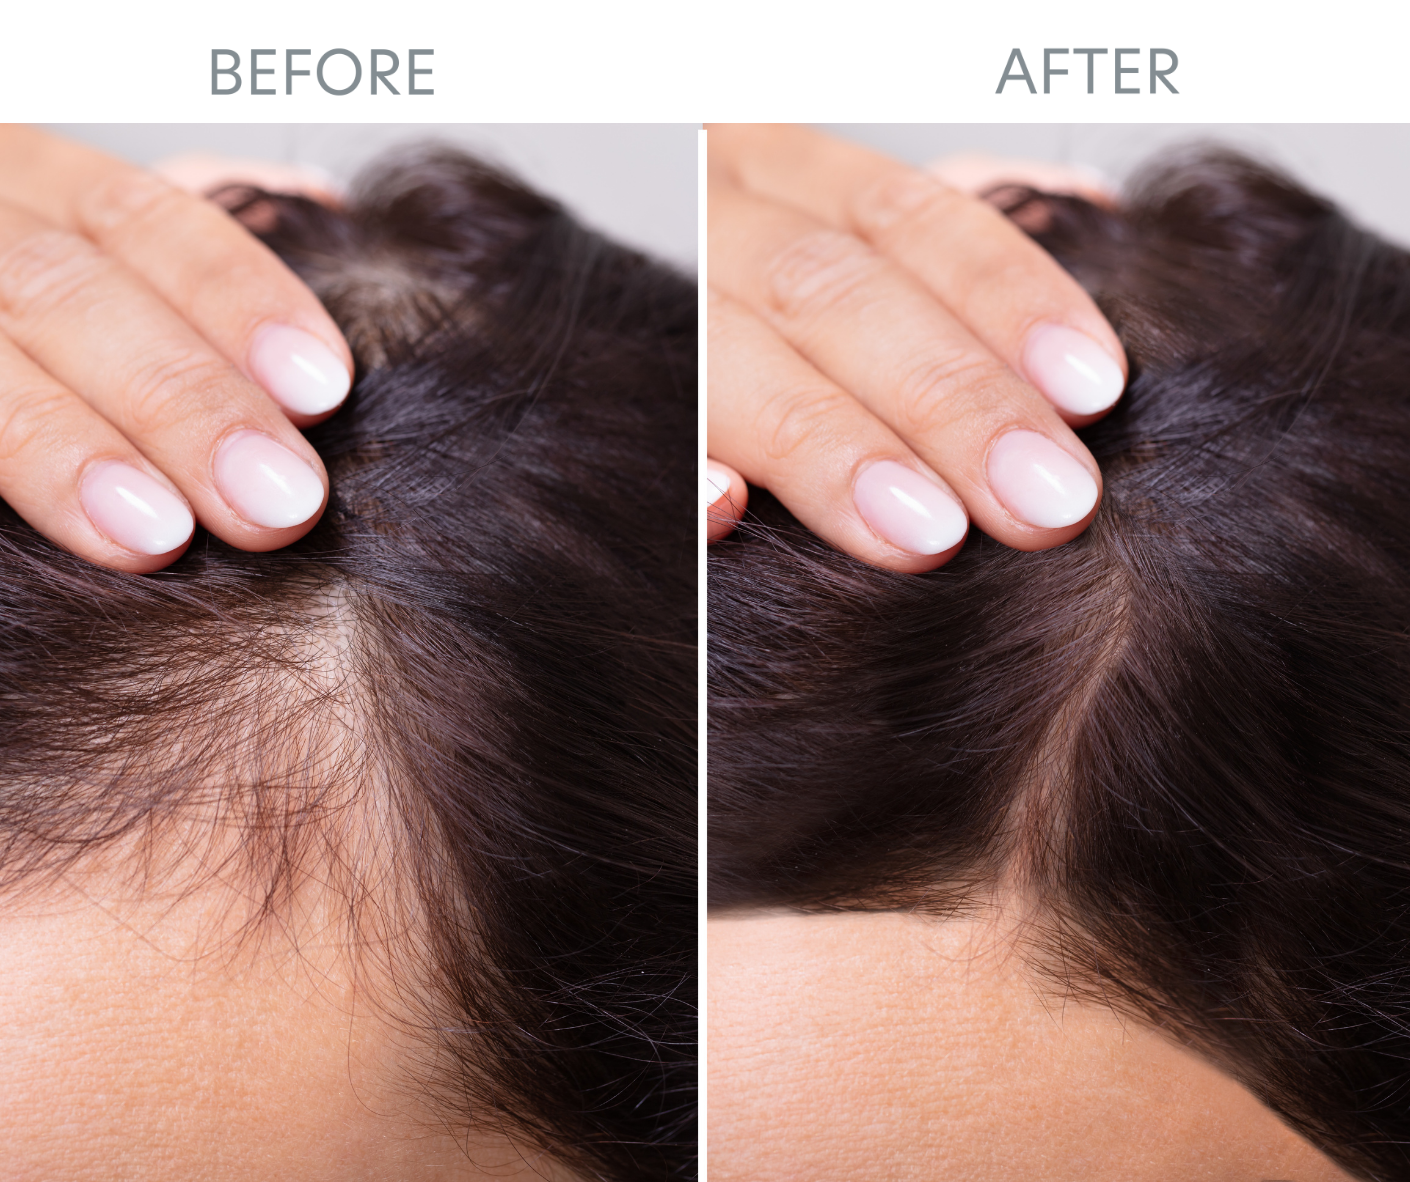 hair restoration before and after in women